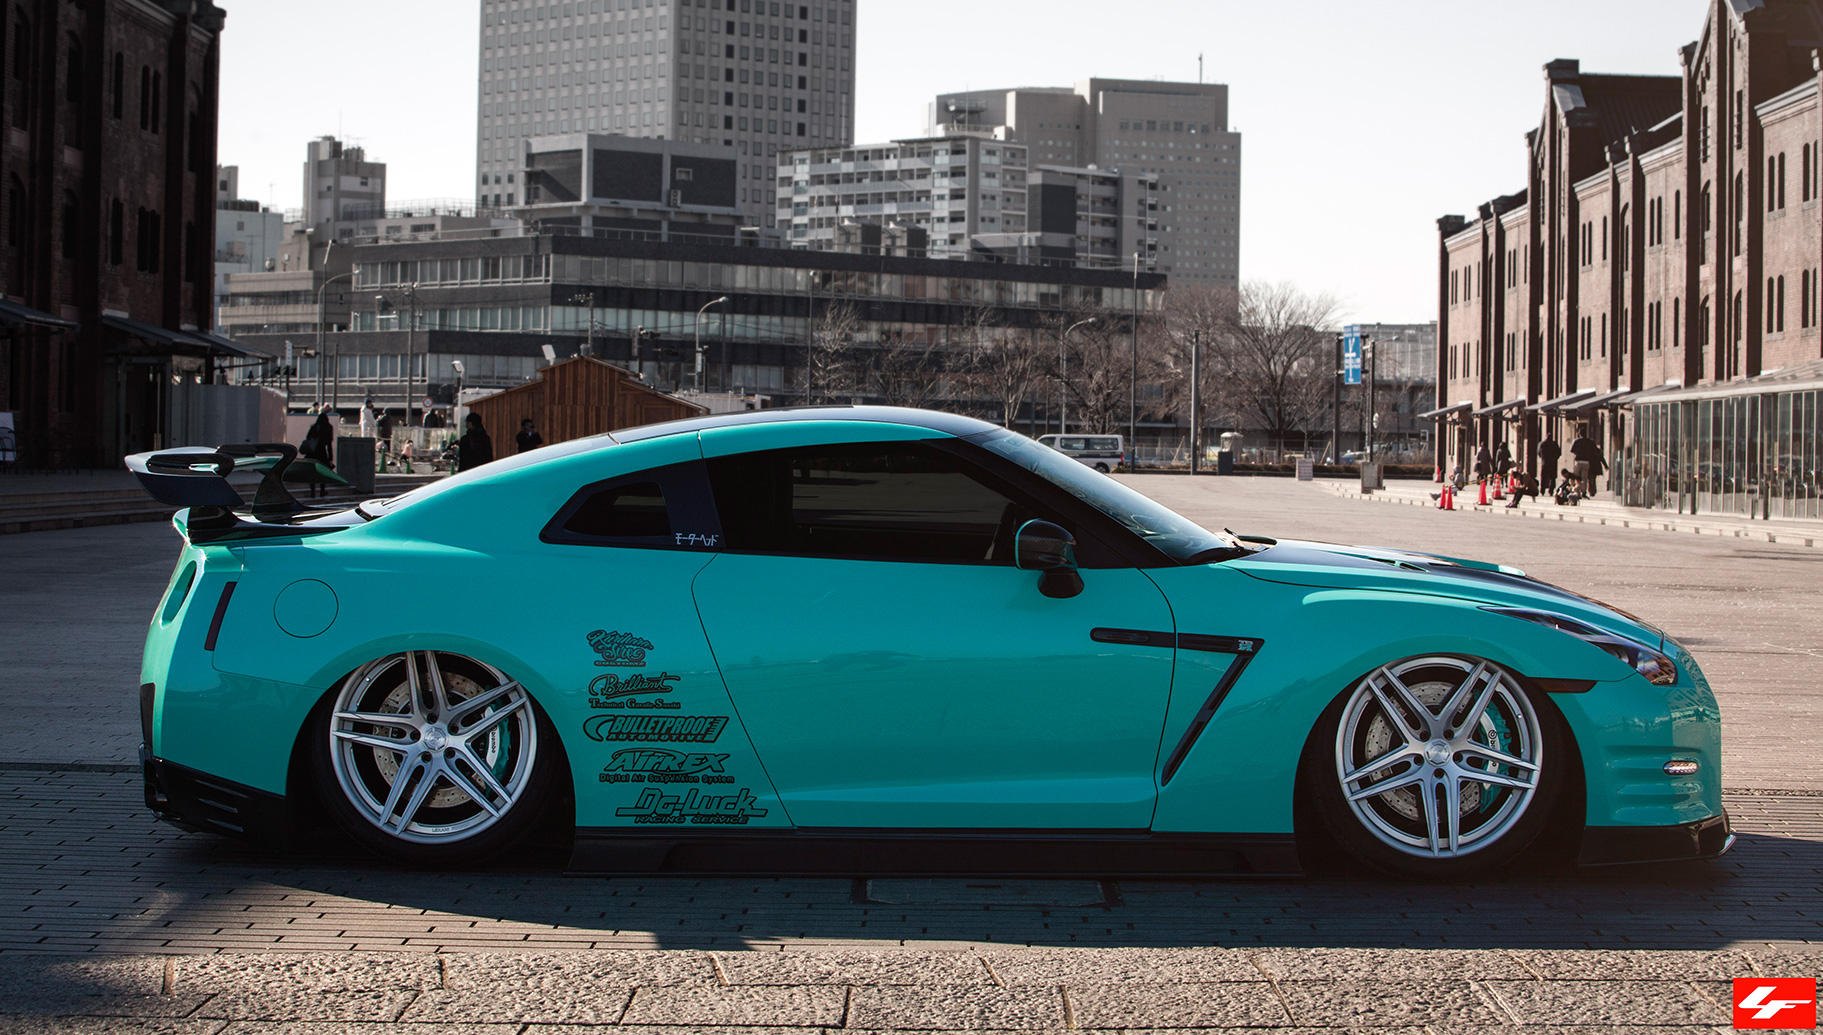 Brushed LZ Series Lexani Rims on Stanced Nissan GT-R - Photo by Lexani